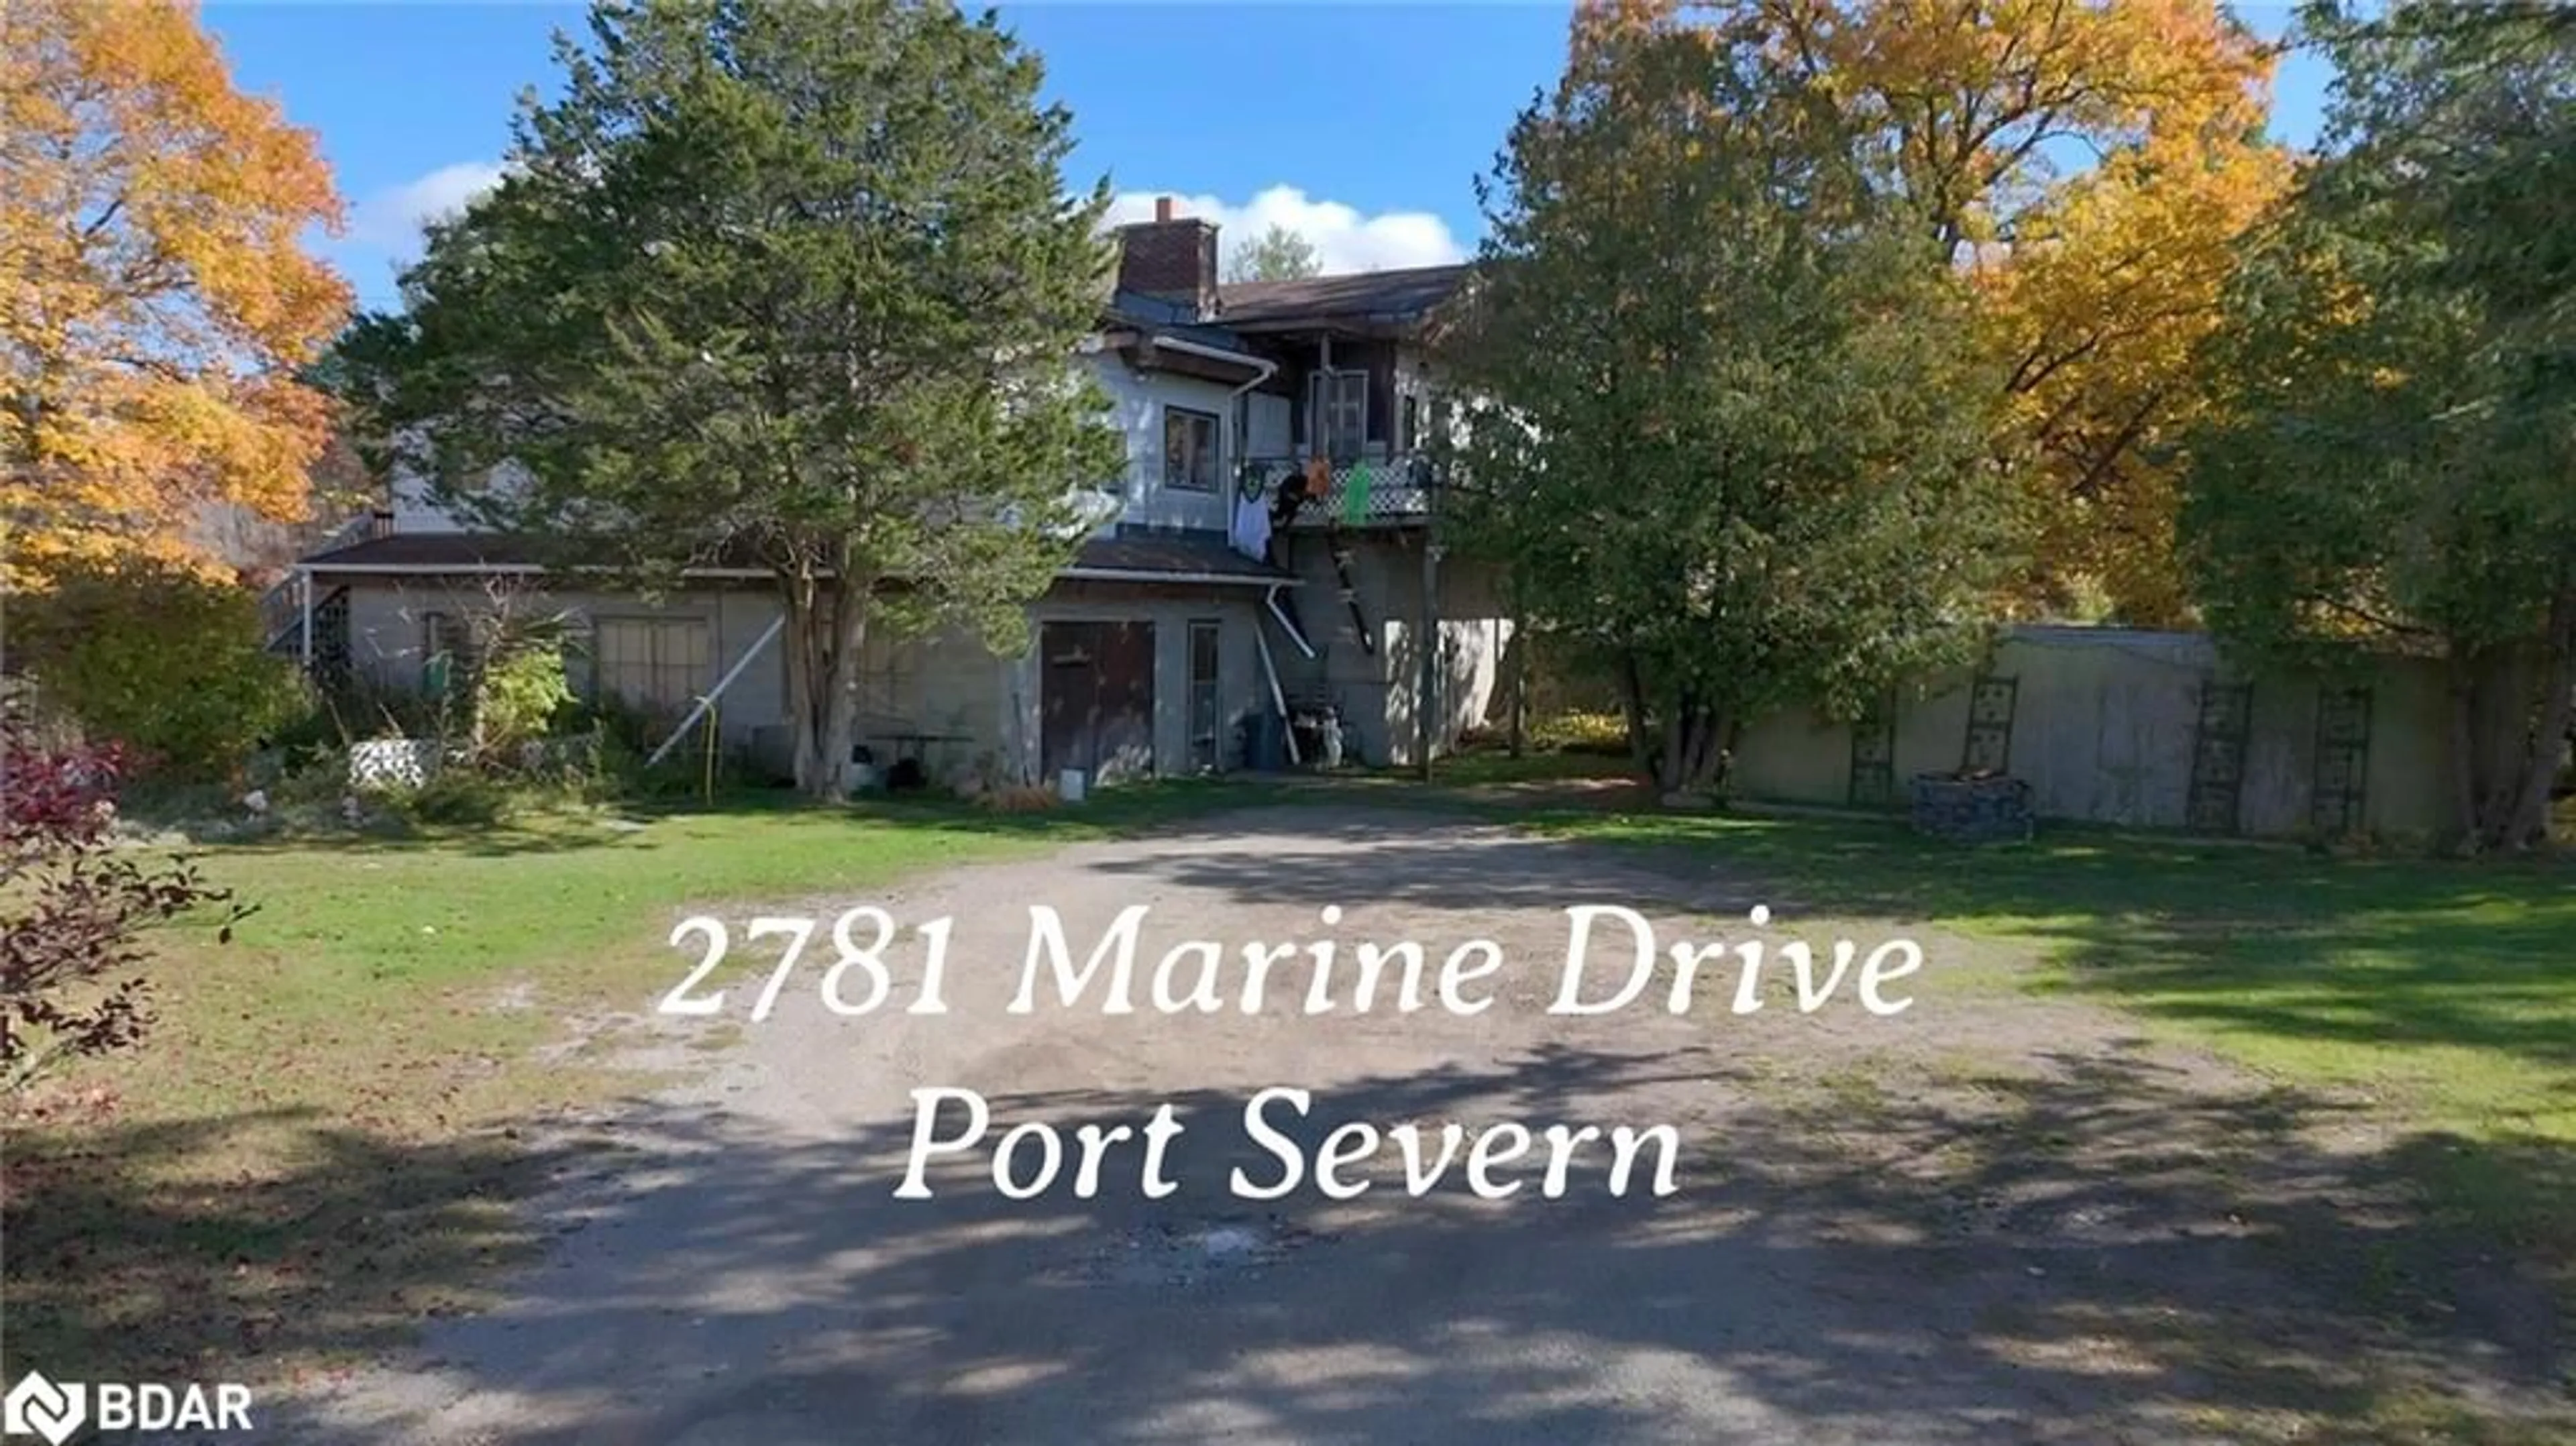 Street view for 2781 Marine Drive Dr, Severn Ontario L0K 1S0